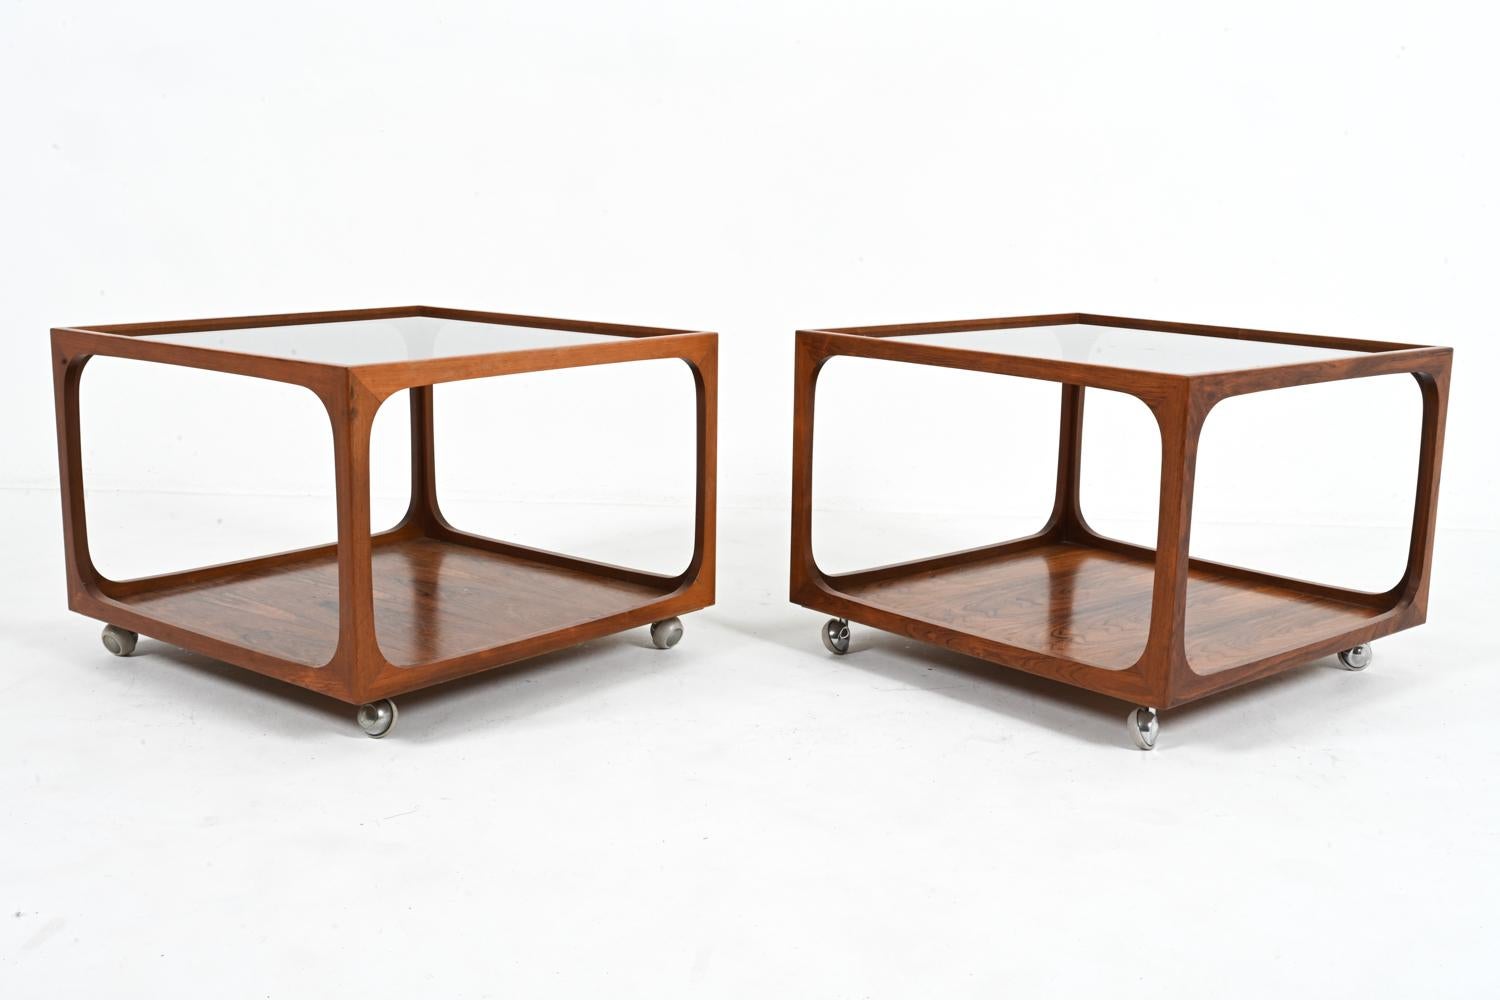 Channel Mid-Century Modern elegance with this exquisite and rare pair of  cocktail tables attributed to the German maker Wilhelm Renz. 

Imbued with the timeless spirit of 1970's design, this exceptional pair of tables embodies the glamour and